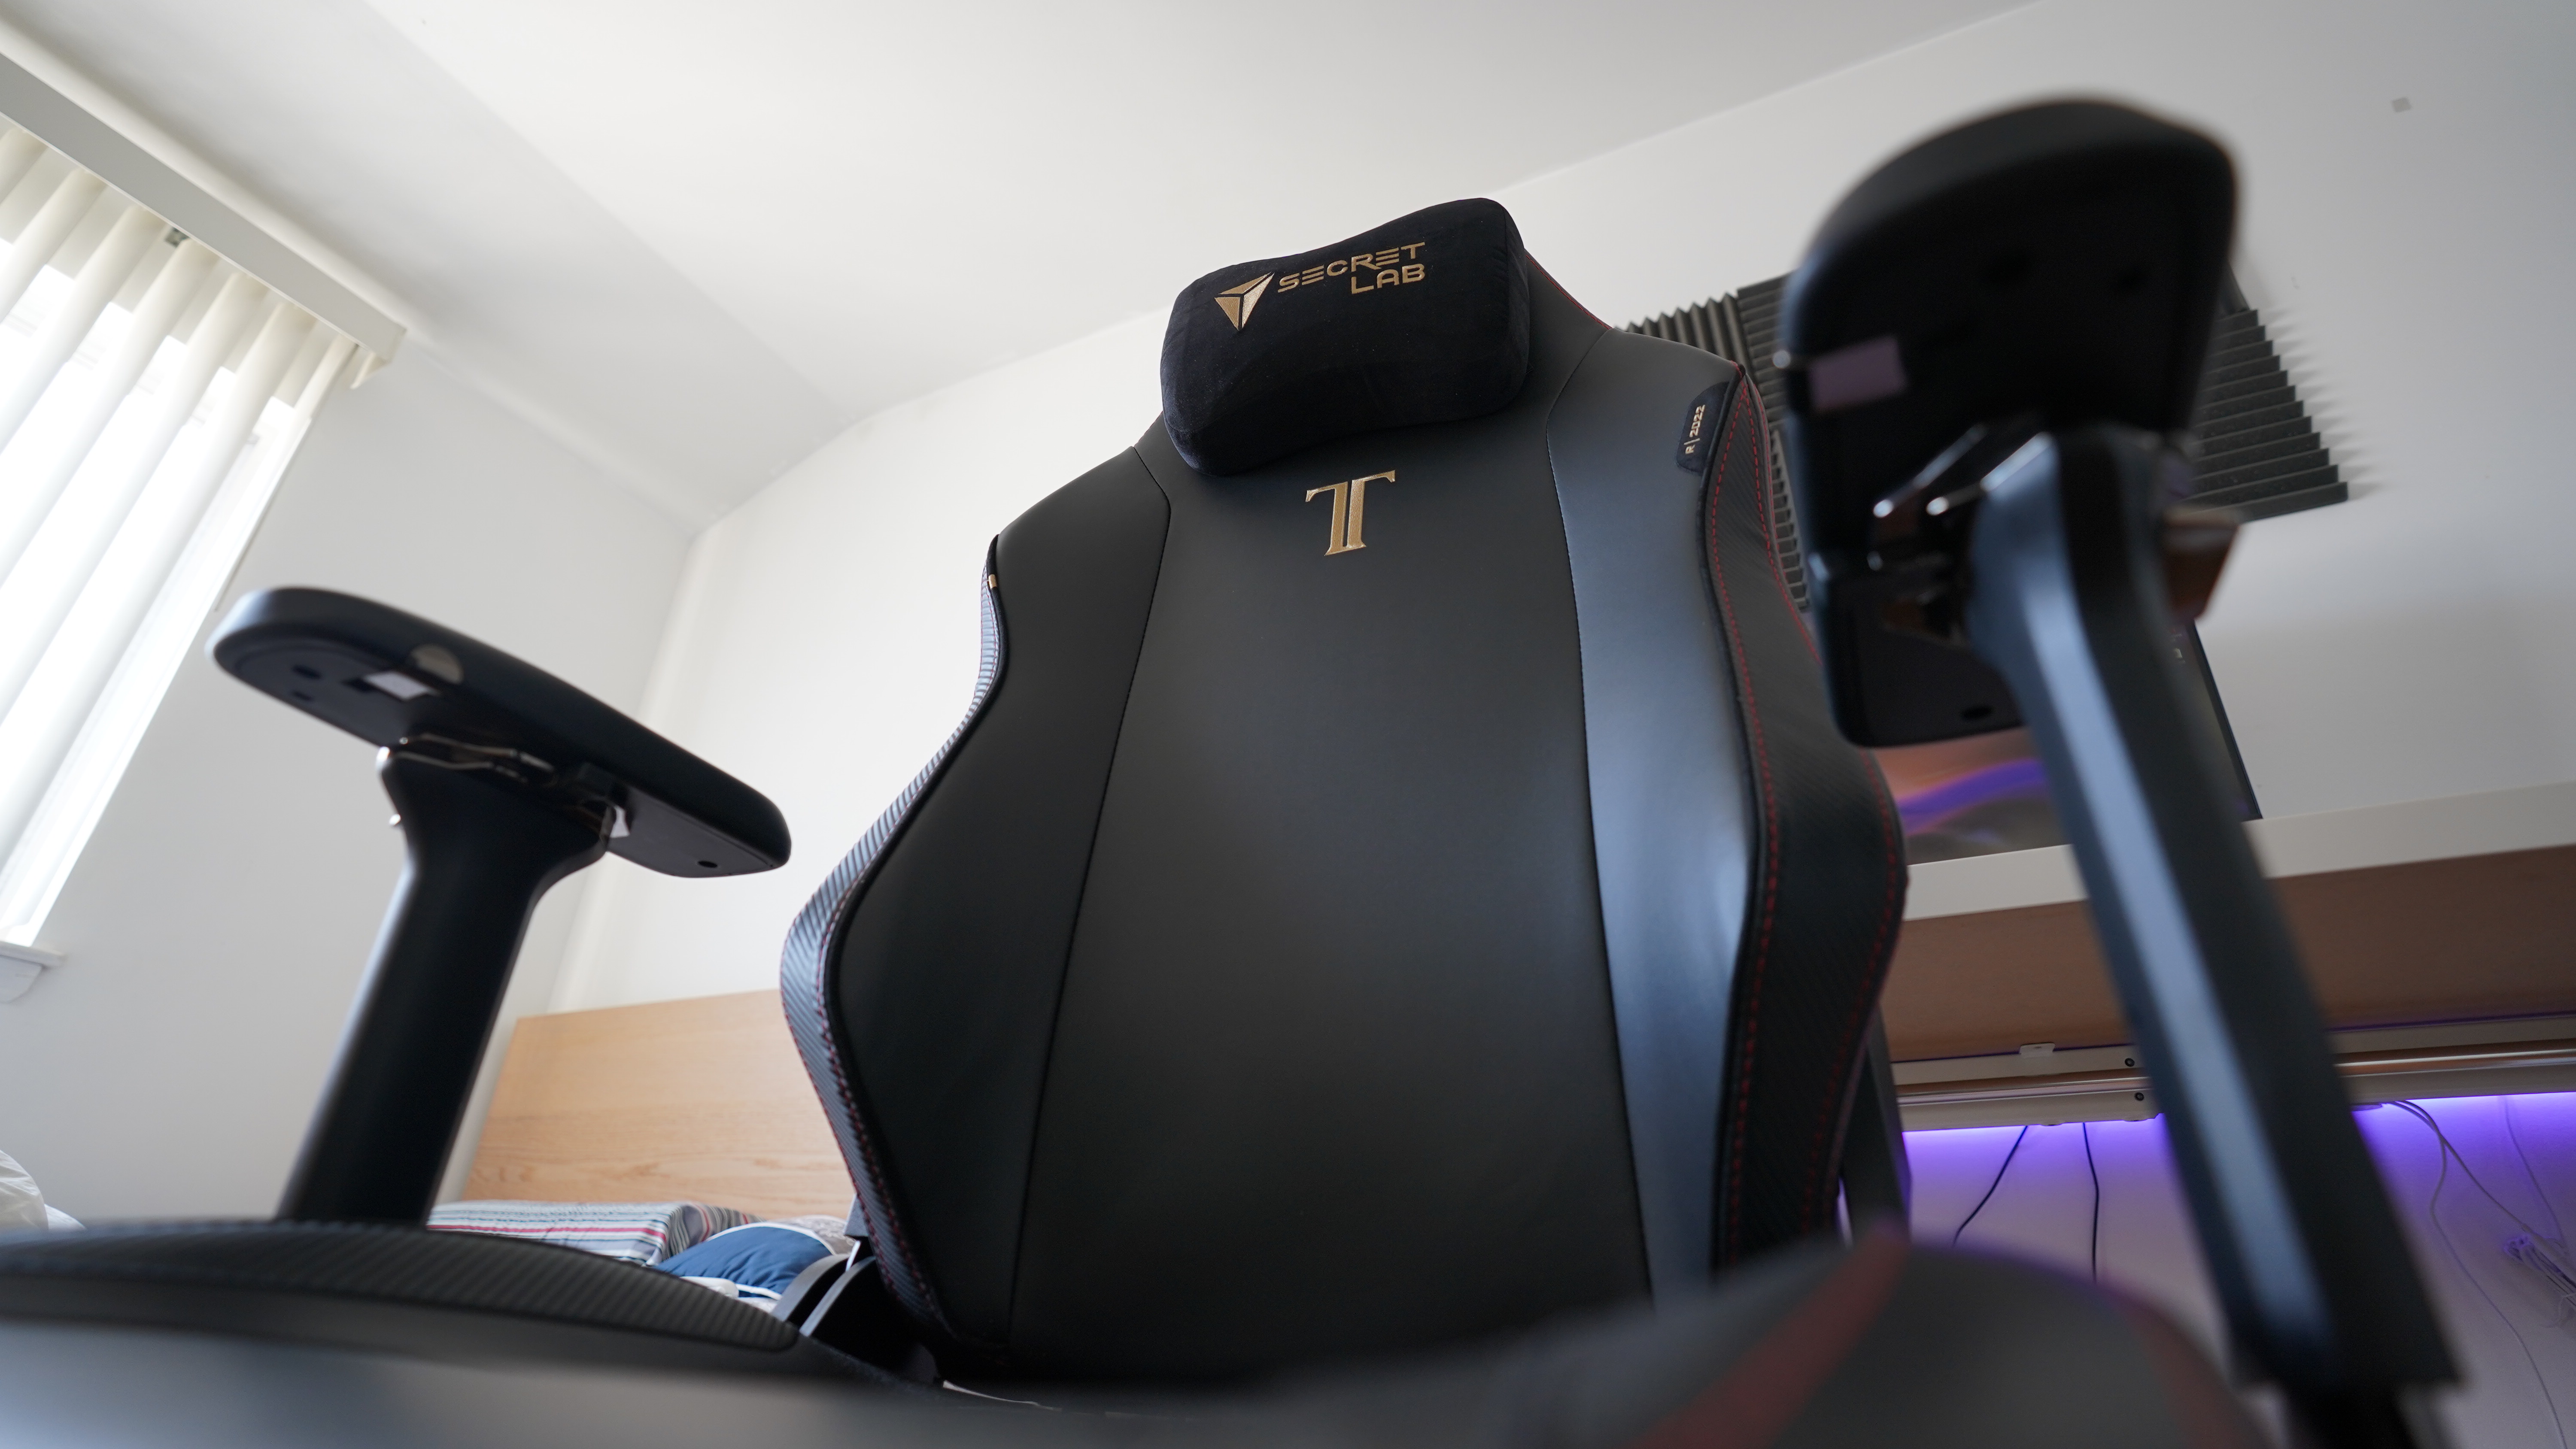 Secretlab Accessories To Upgrade Your Gaming Chair